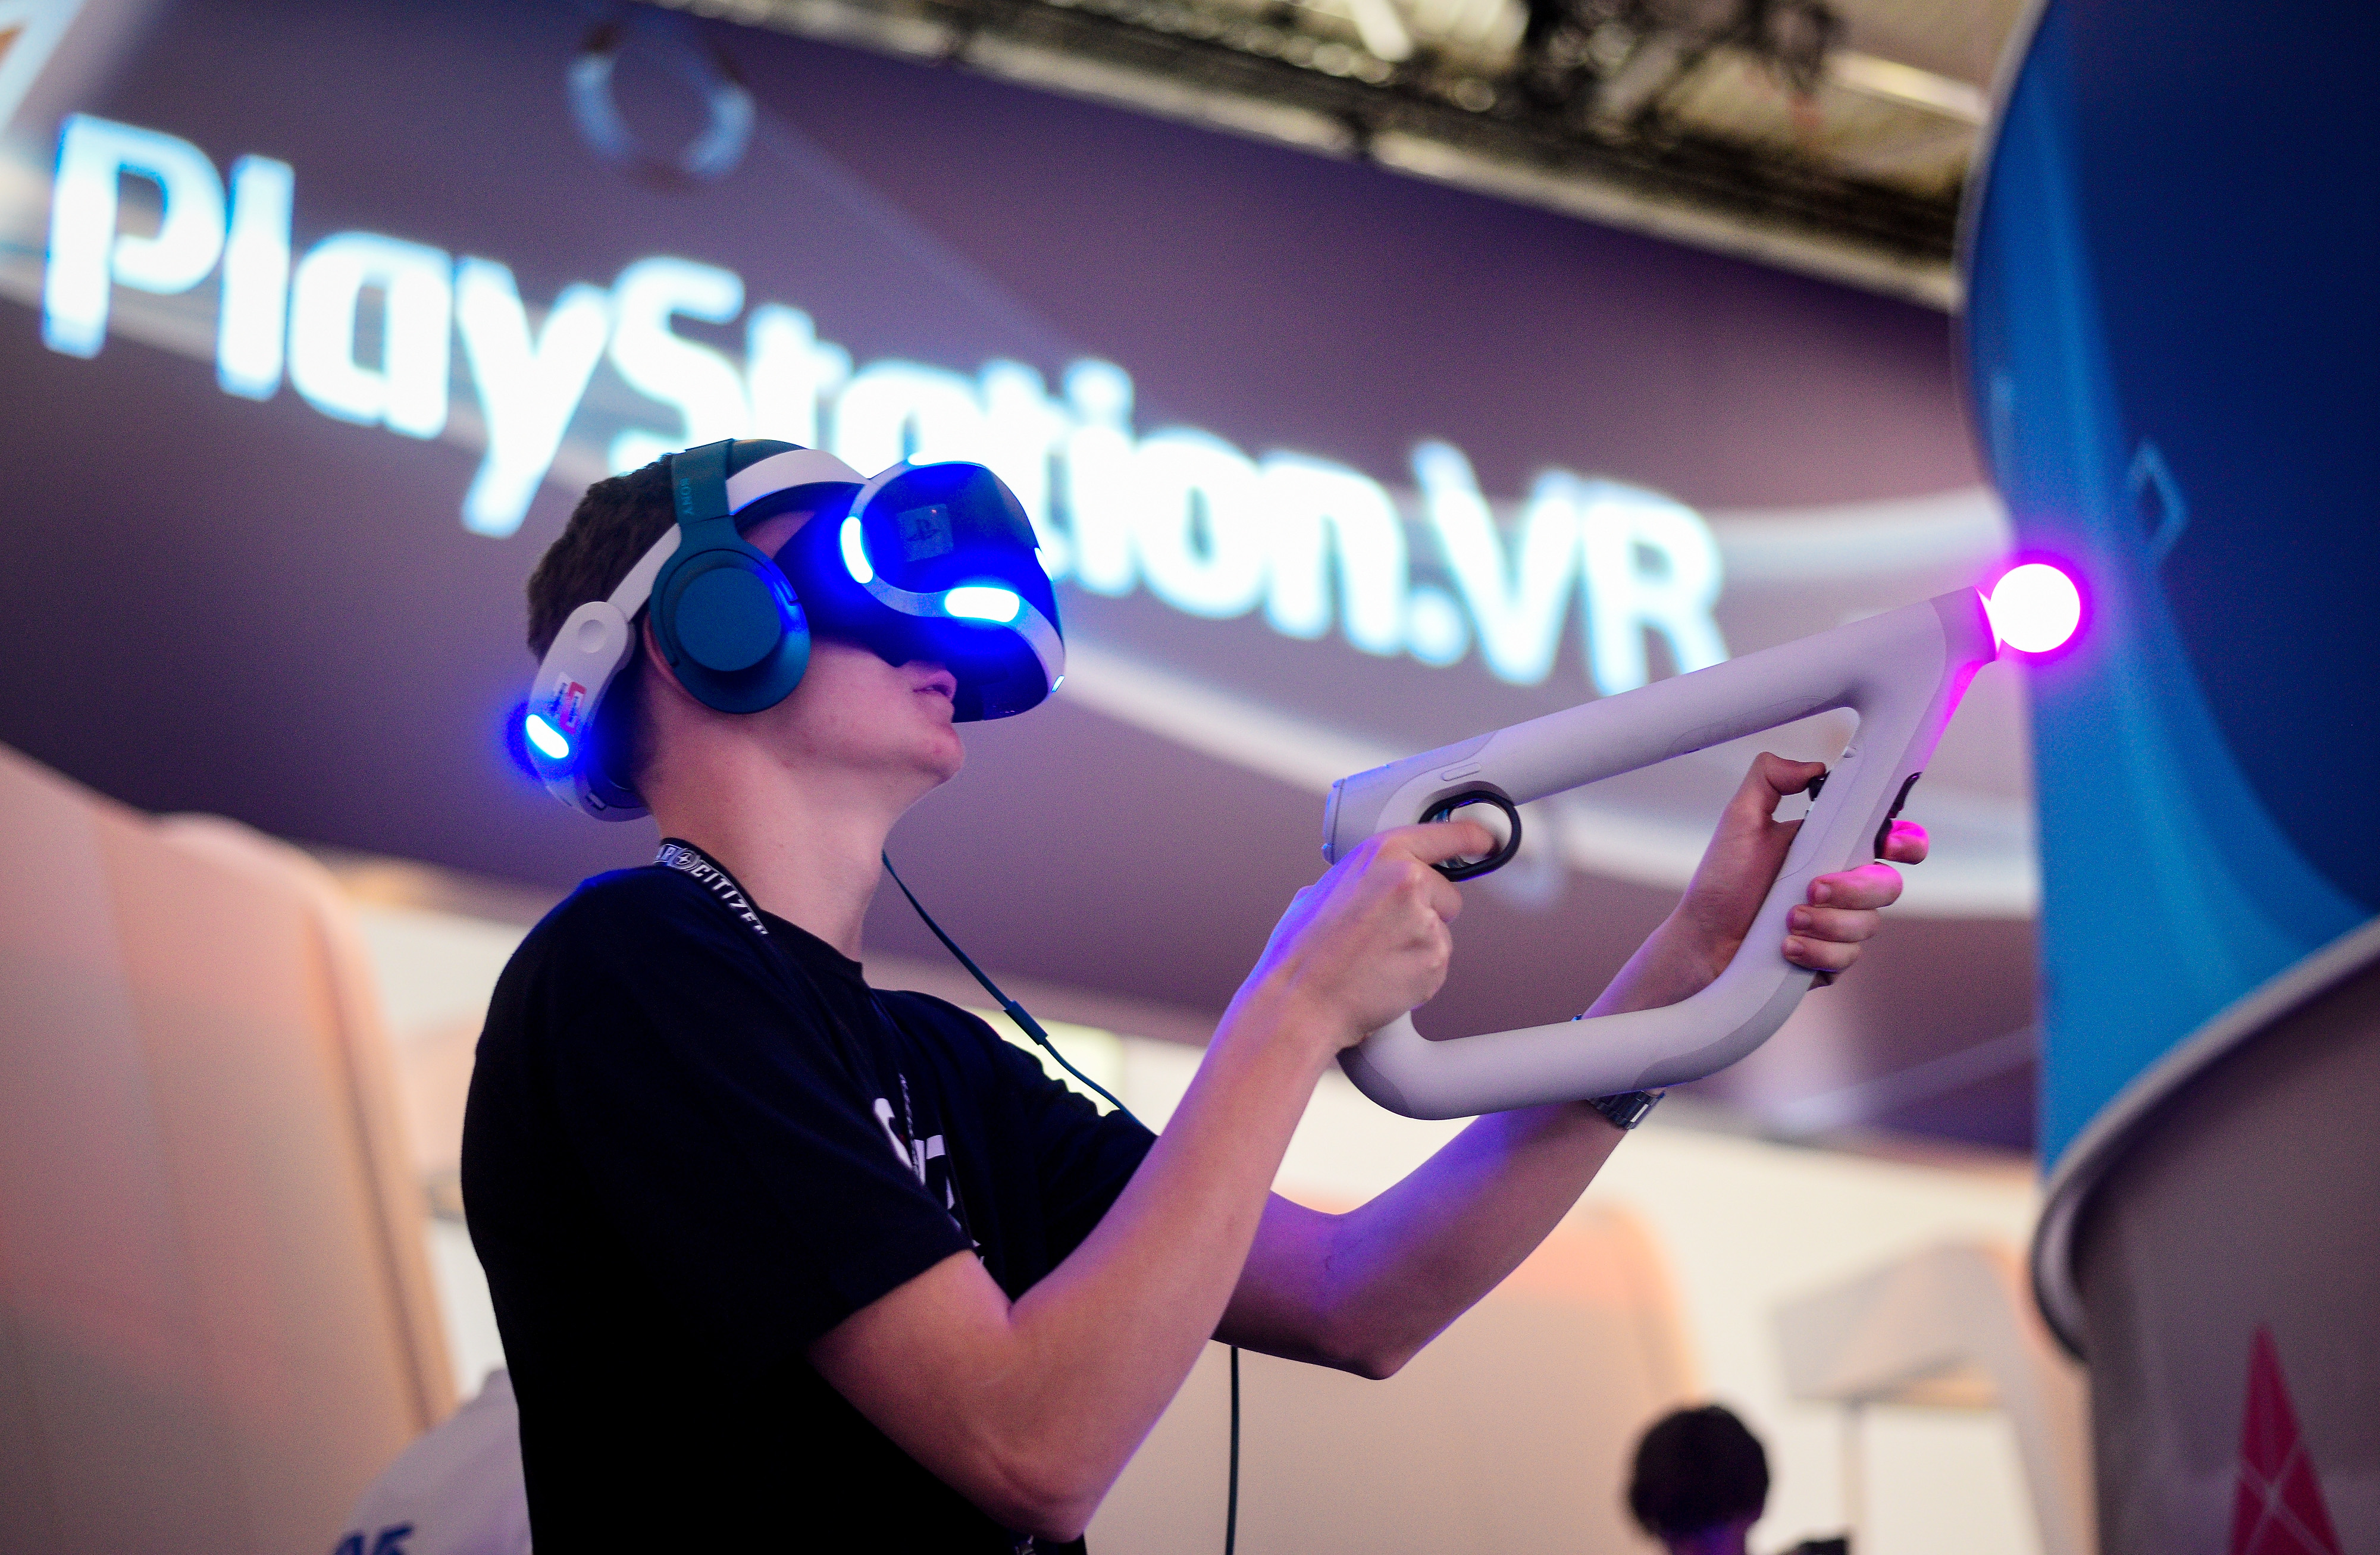 A Visitor try out a VR game at the Sony Play Station stand at the Gamescom 2016 gaming trade fair during the media day on August 17, 2016 in Cologne, Germany. (Sascha Schuermann—Getty Images)